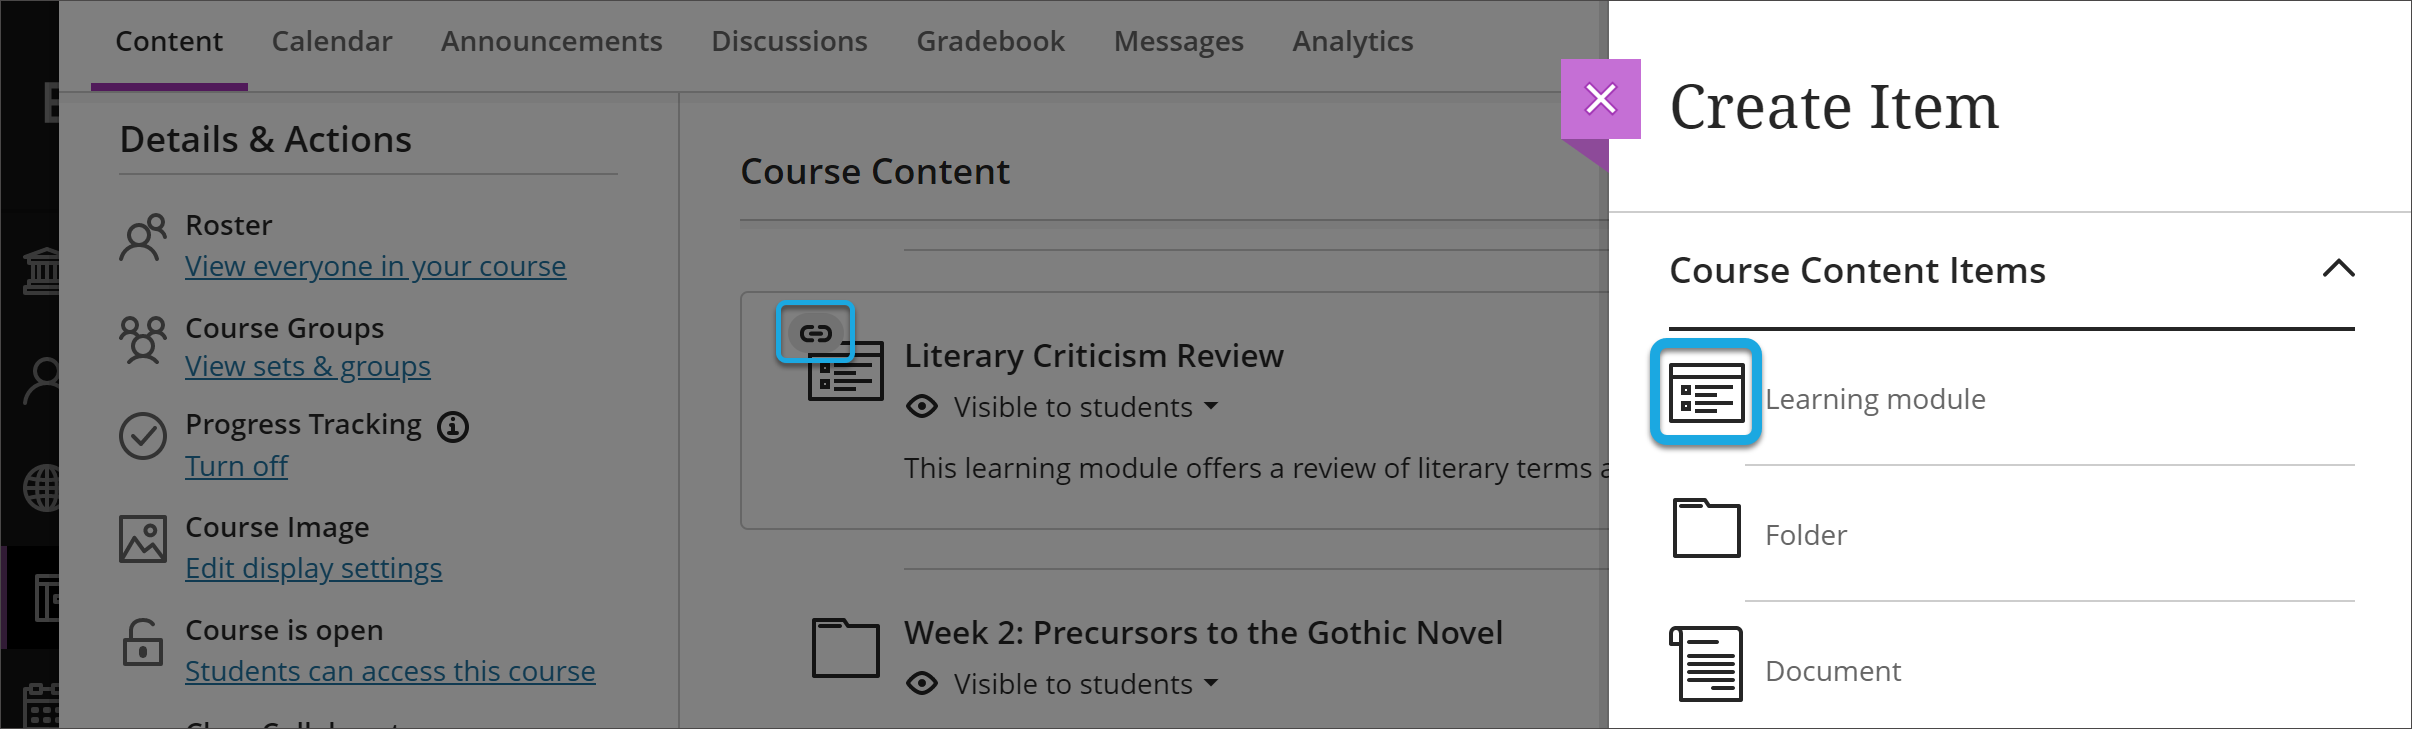 image of course link icon on Course Content page and learning module icon on Create Item panel